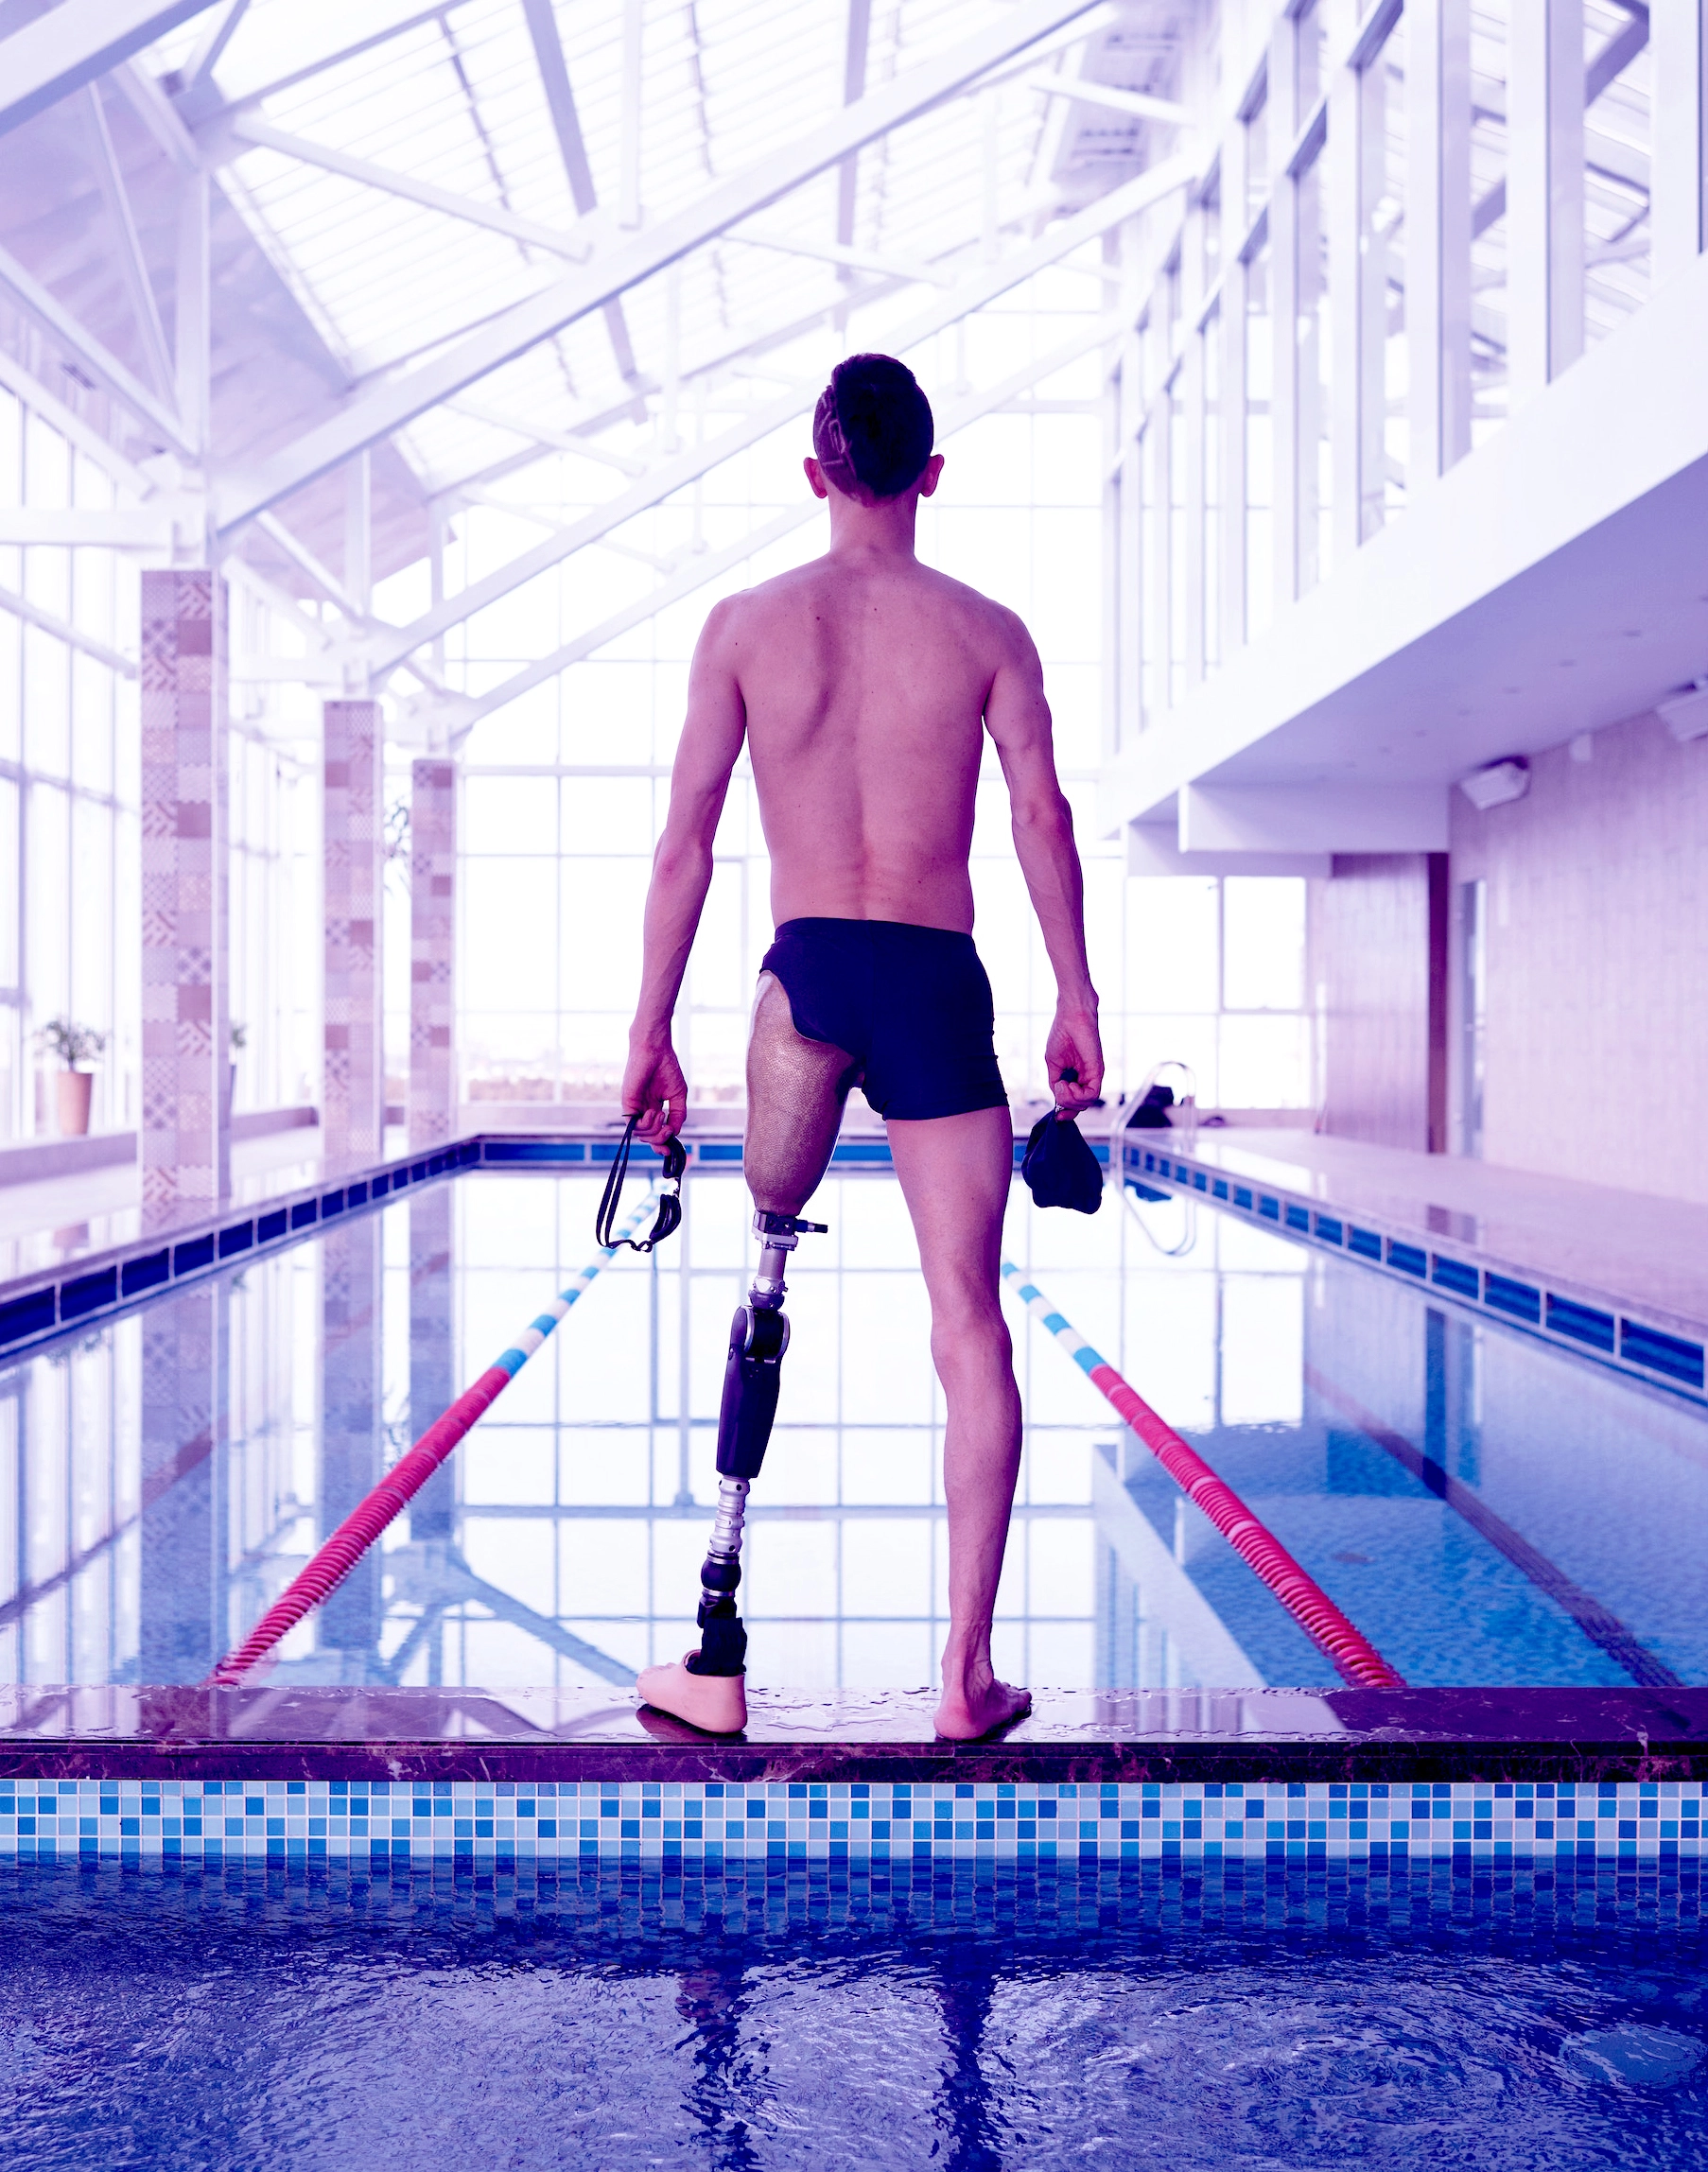 Person with a leg prosthetic standing in front of a swimming pool, their back towards the camera